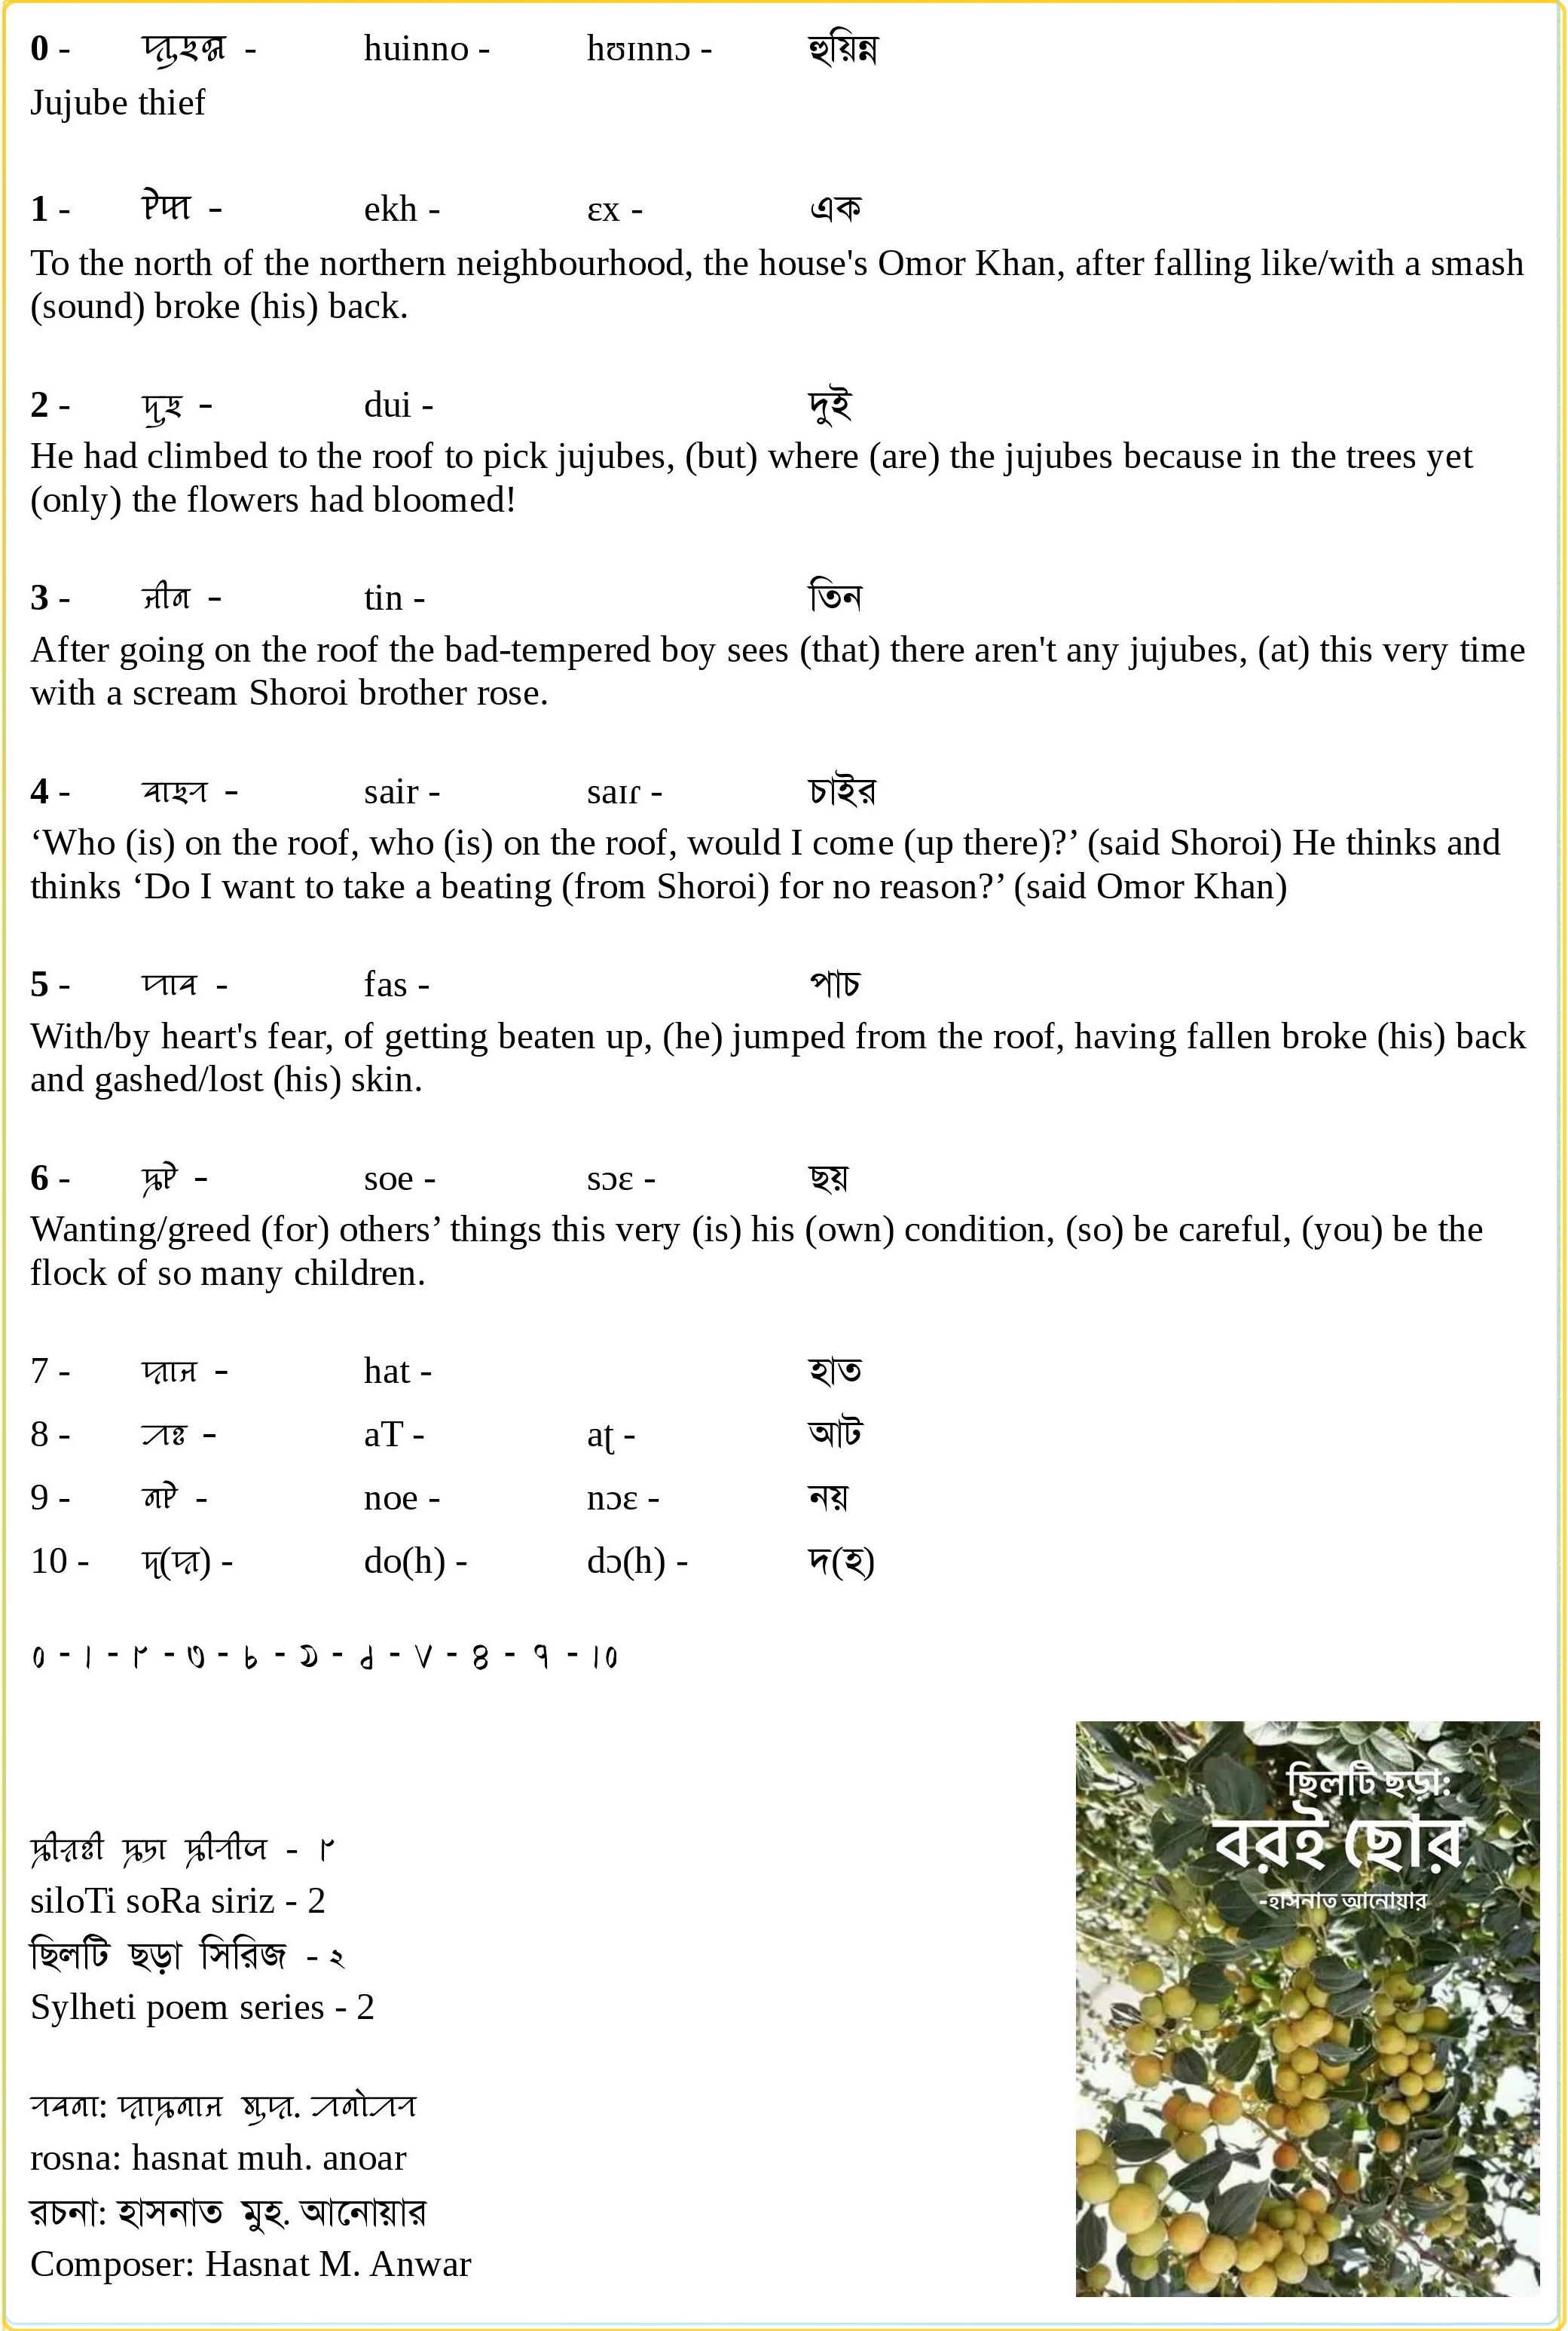 boroi_sur-Hasnat_Anwar-in_3_scripts_and_translation-0002-modified